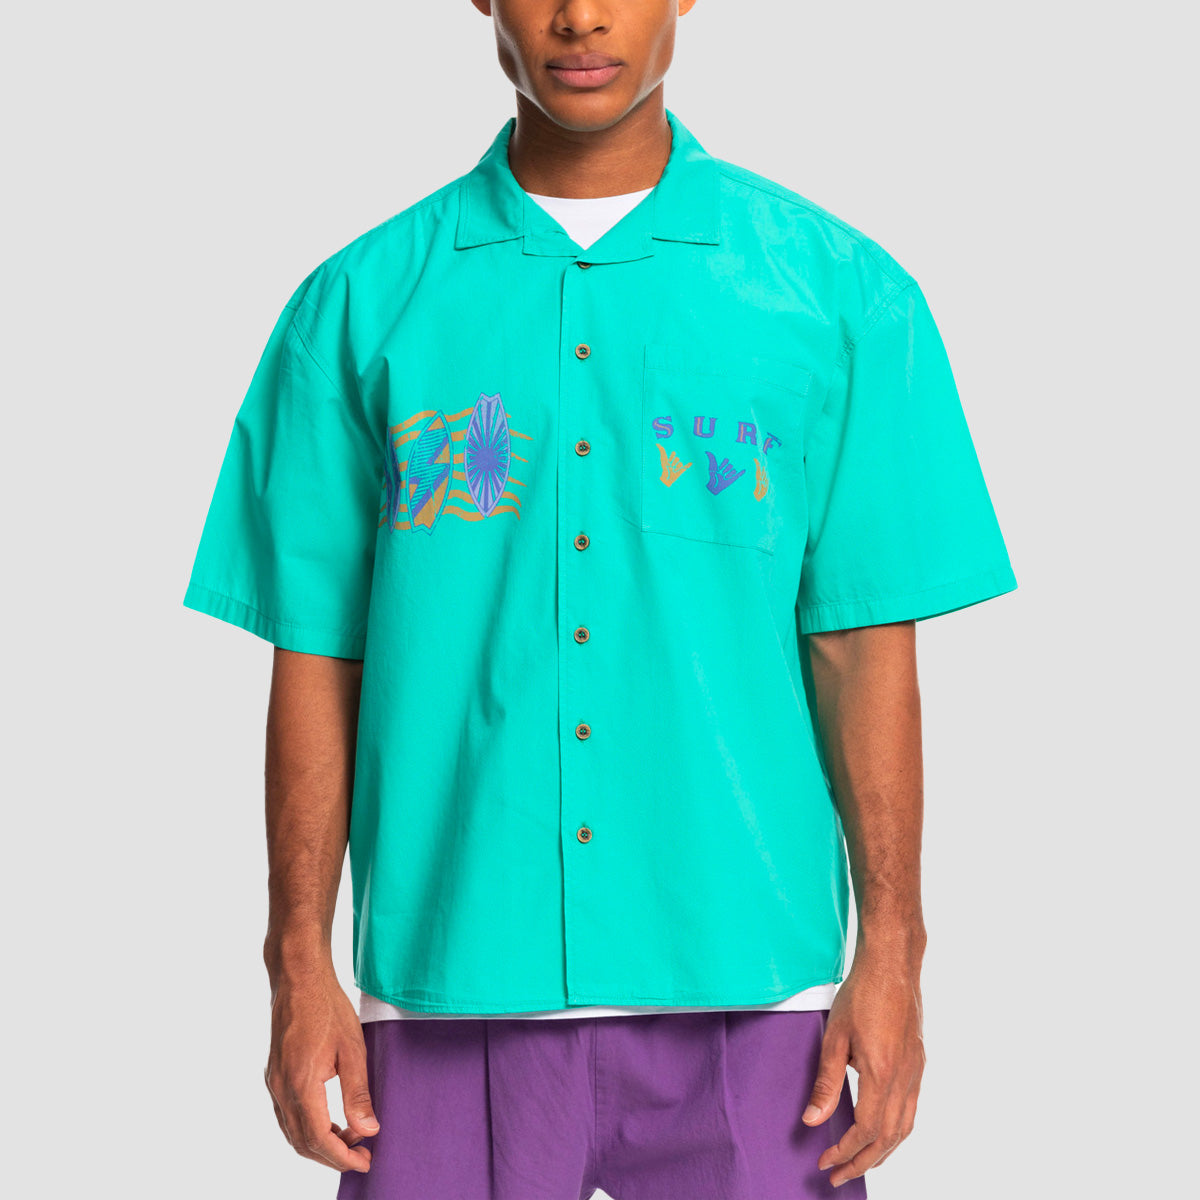 Quiksilver x Stranger Things The Mike Short Sleeve Shirt Pool Green